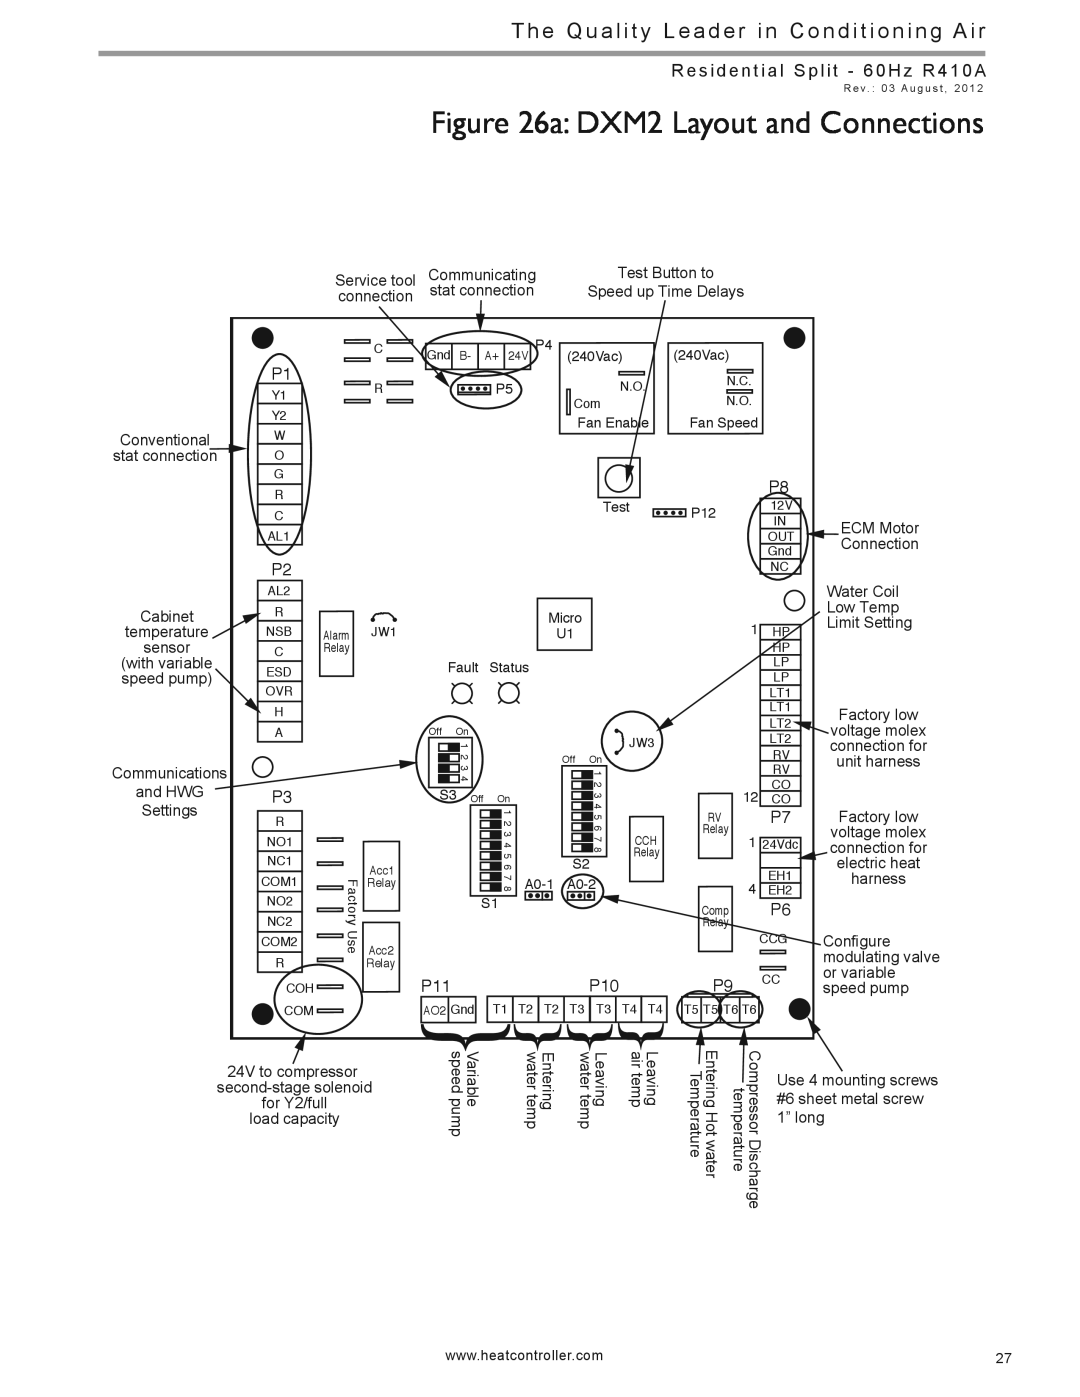 Heat Controller HTS SERIES manual a: DXM2 Layout and Connections, P11P10, P9 CC 